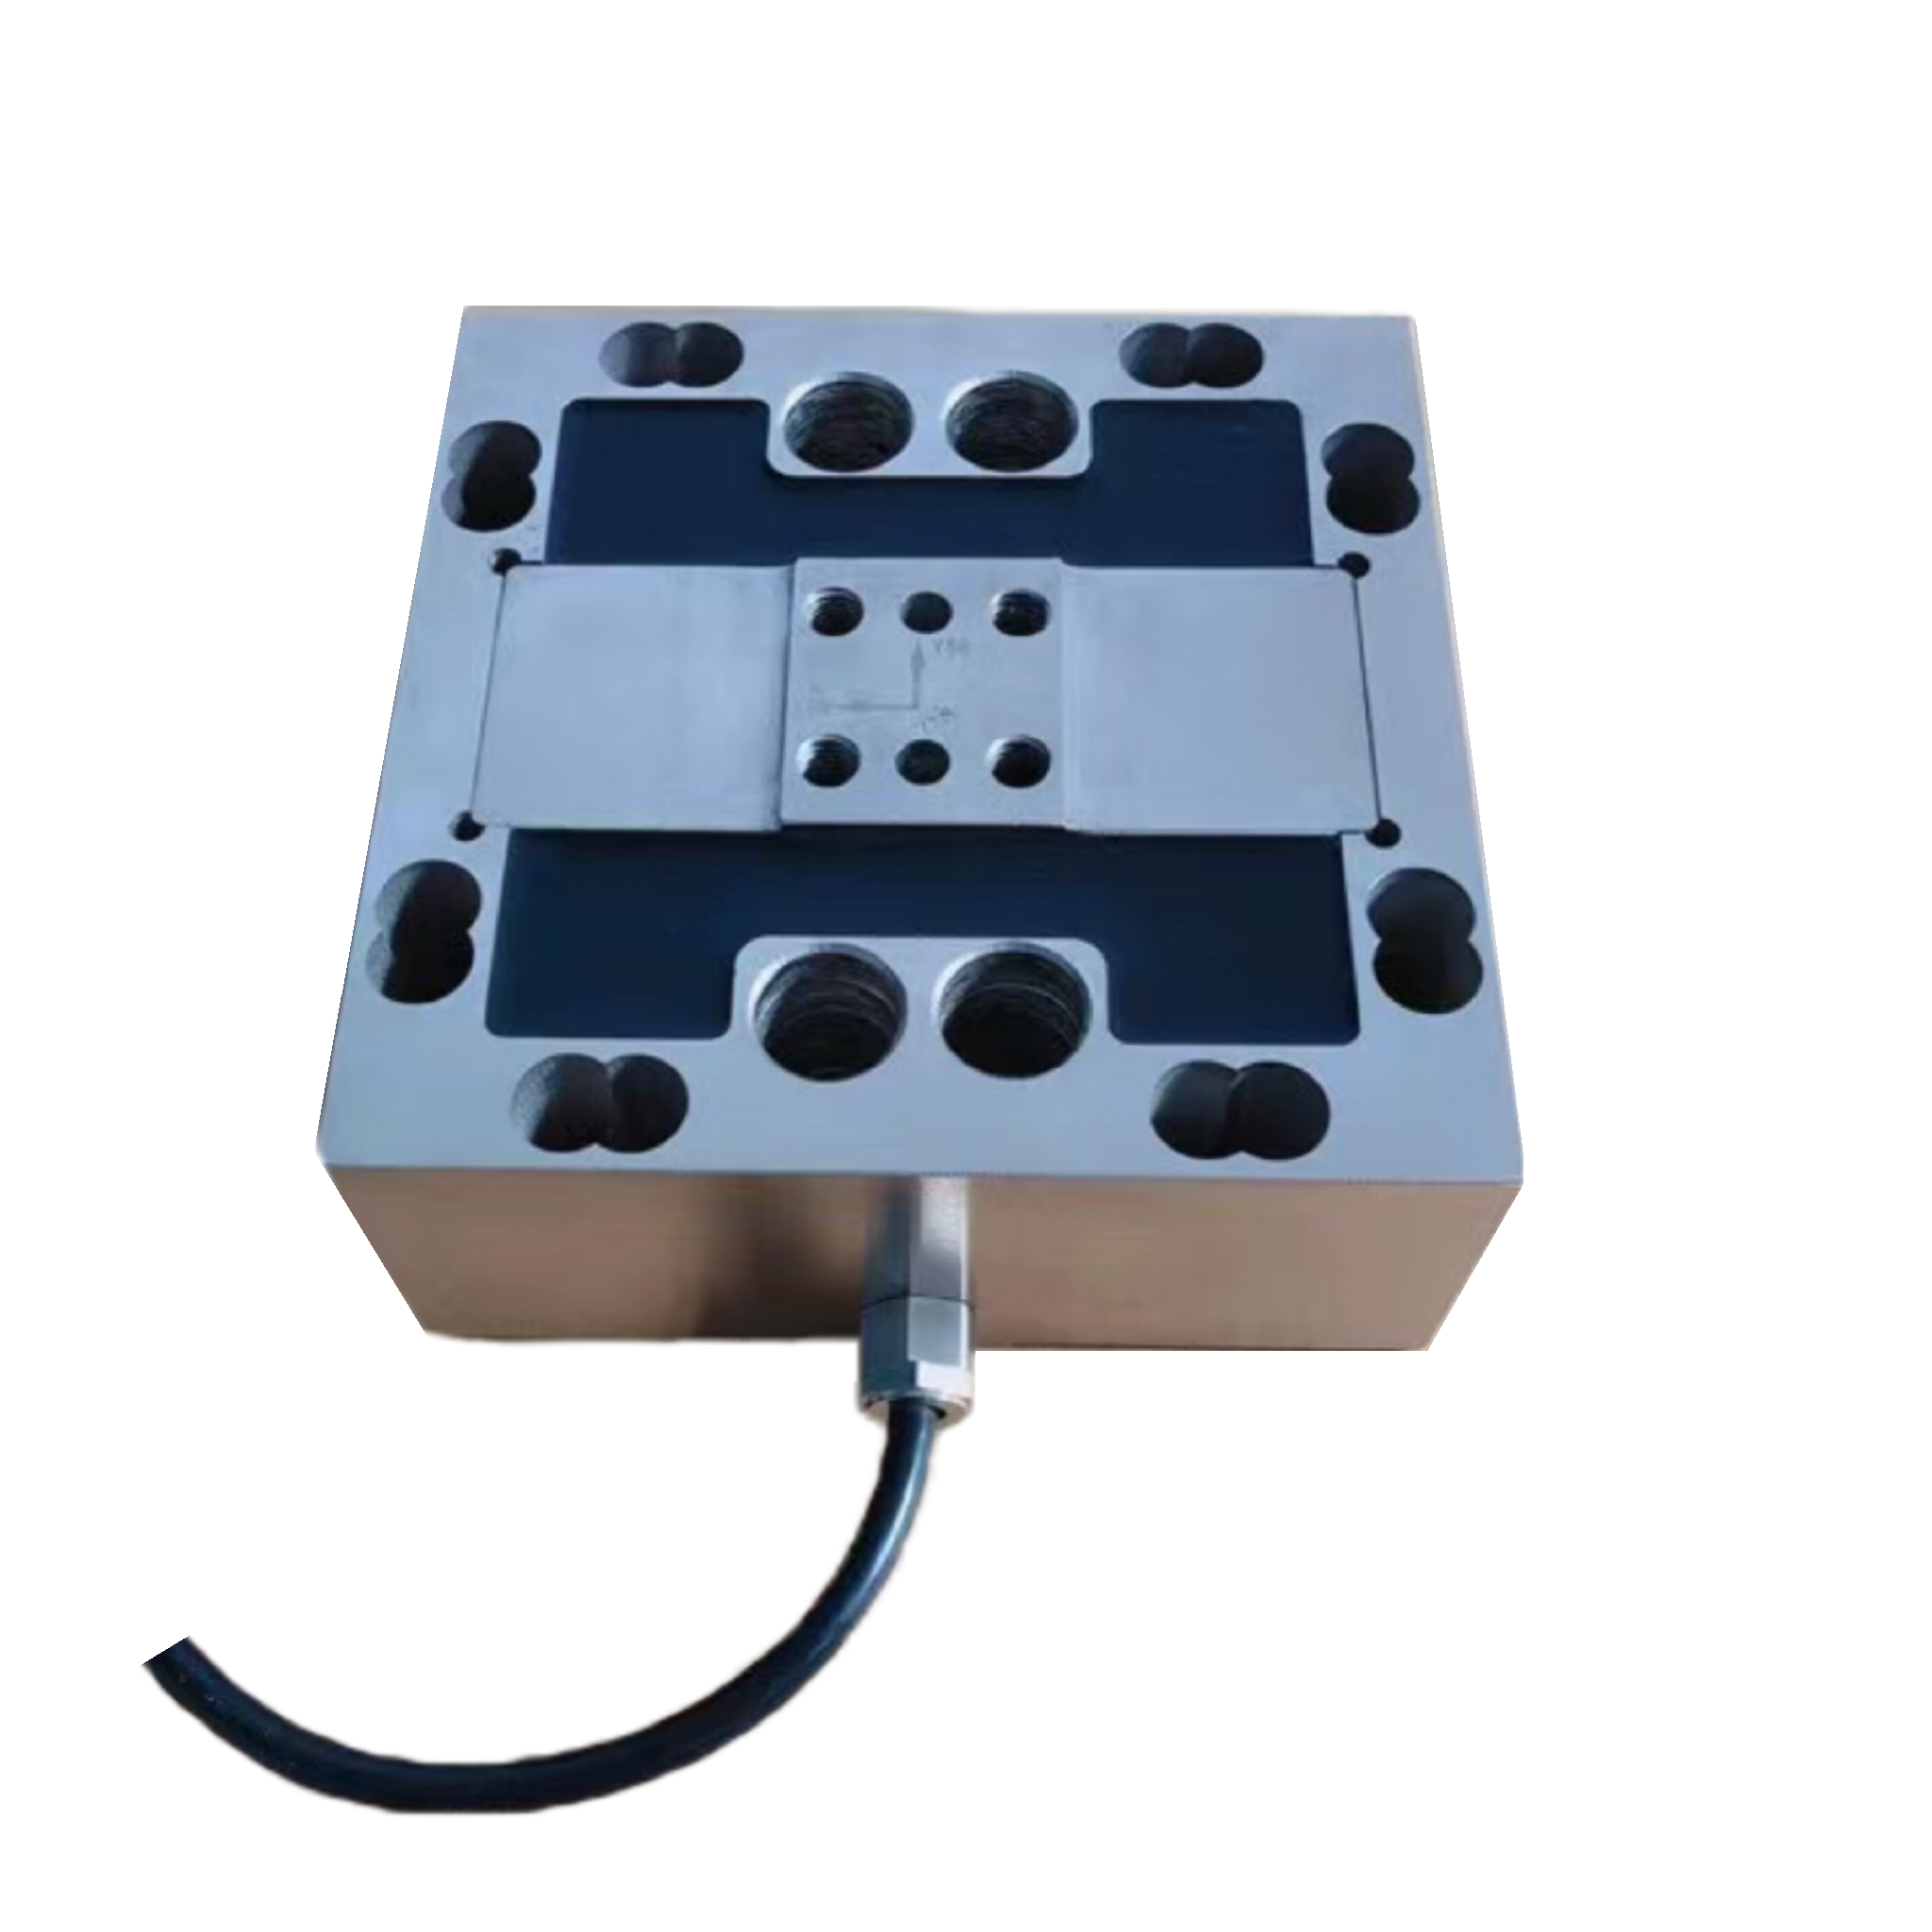 LCX3006 Three Directional Load Cell Transducers Multi Axis Force Sensor 3 Axis Load Cell